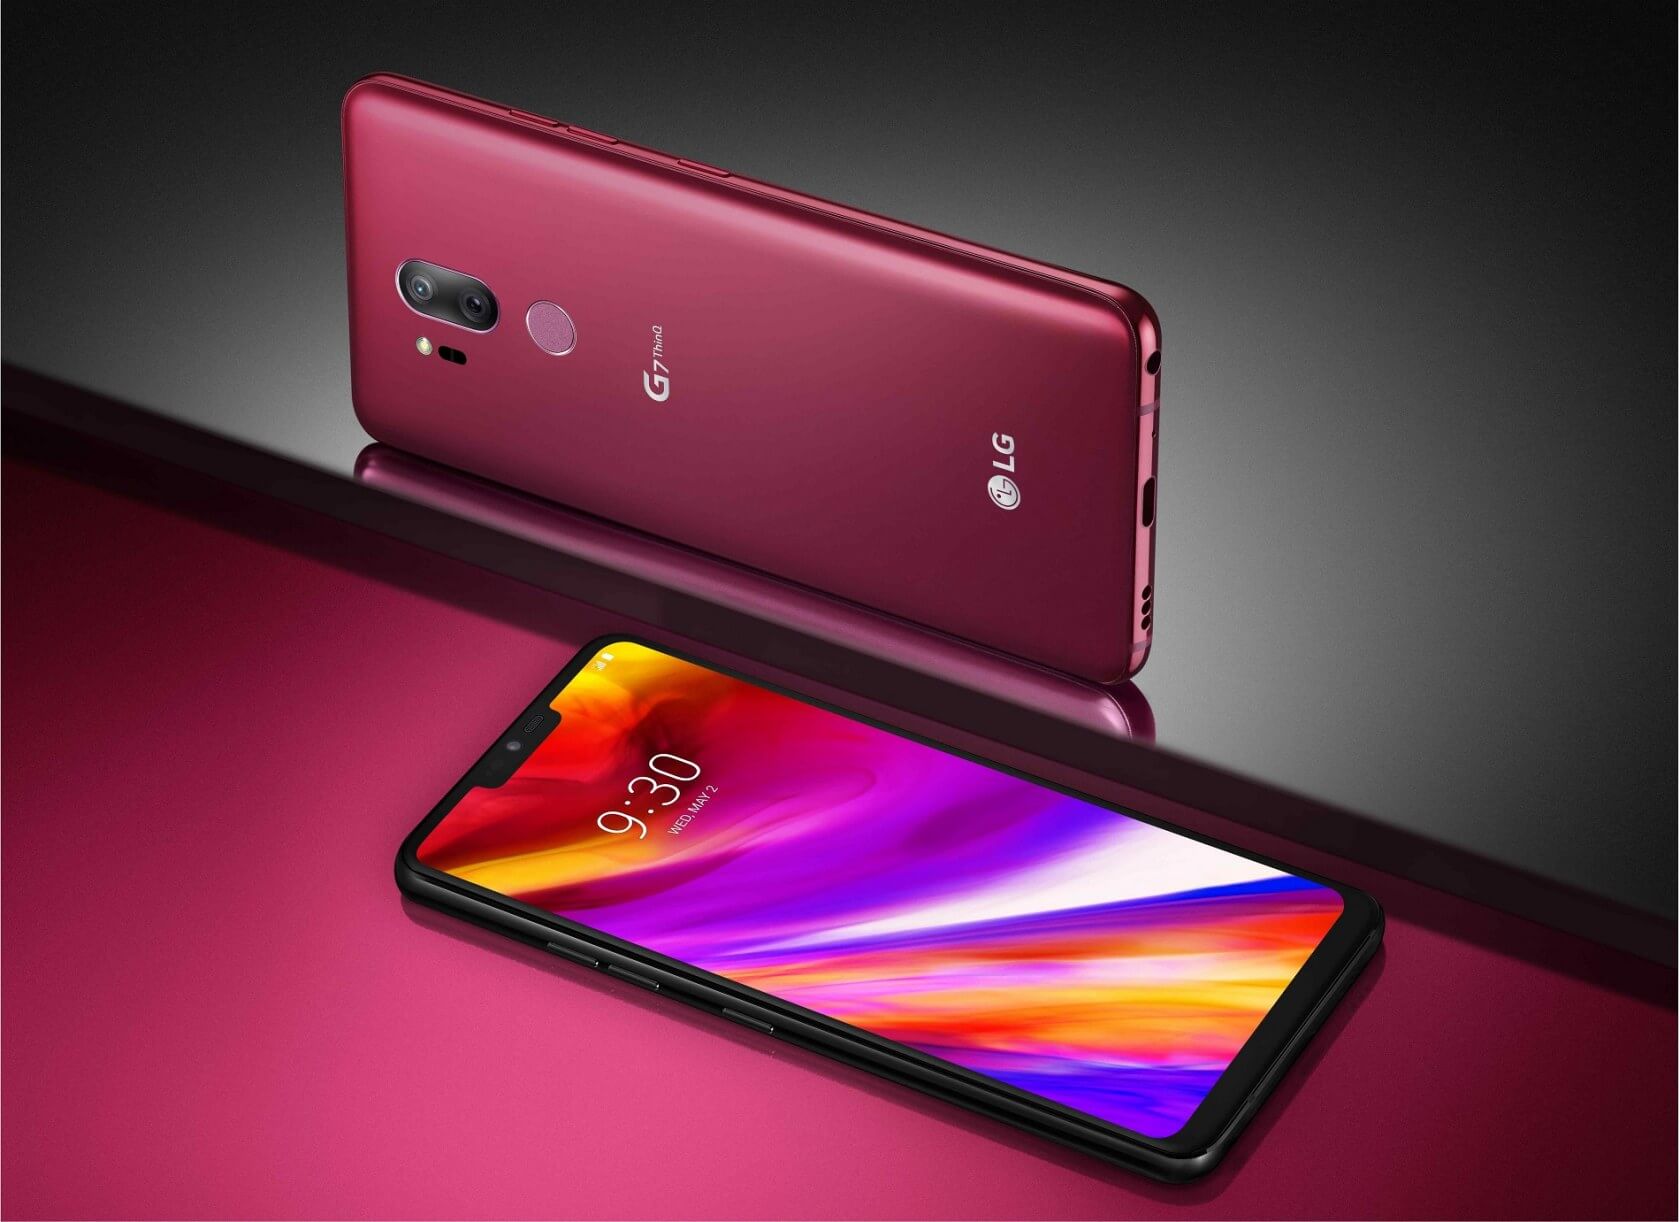 LG says it thought up the notch long before Apple